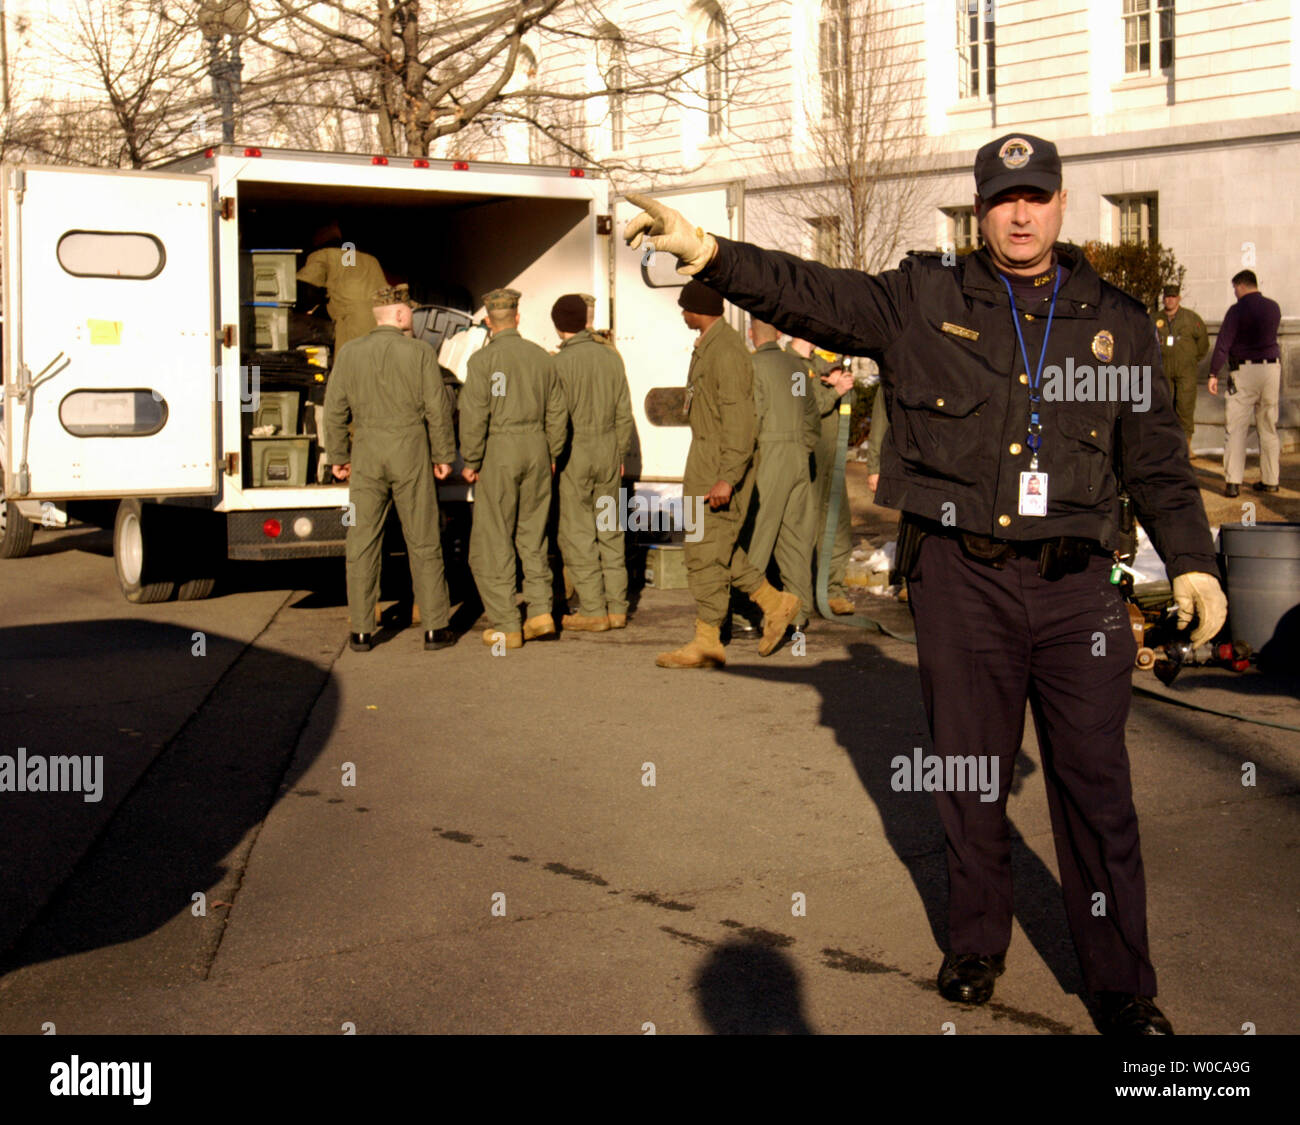 A Capitol Hill police officer tells people to clear the area as marines from the 4th MEB (AT) set up a cleaning station for biohazards materials outside the Russell Senate office building, on February 4, 2004 in Washington.  Three senate office buildings are being sanitized after ricin was discovered two days earlier in the mail room of Sen. Bill Frist, R-Tenn. (UPI Photo/Michael Kleinfeld) Stock Photo